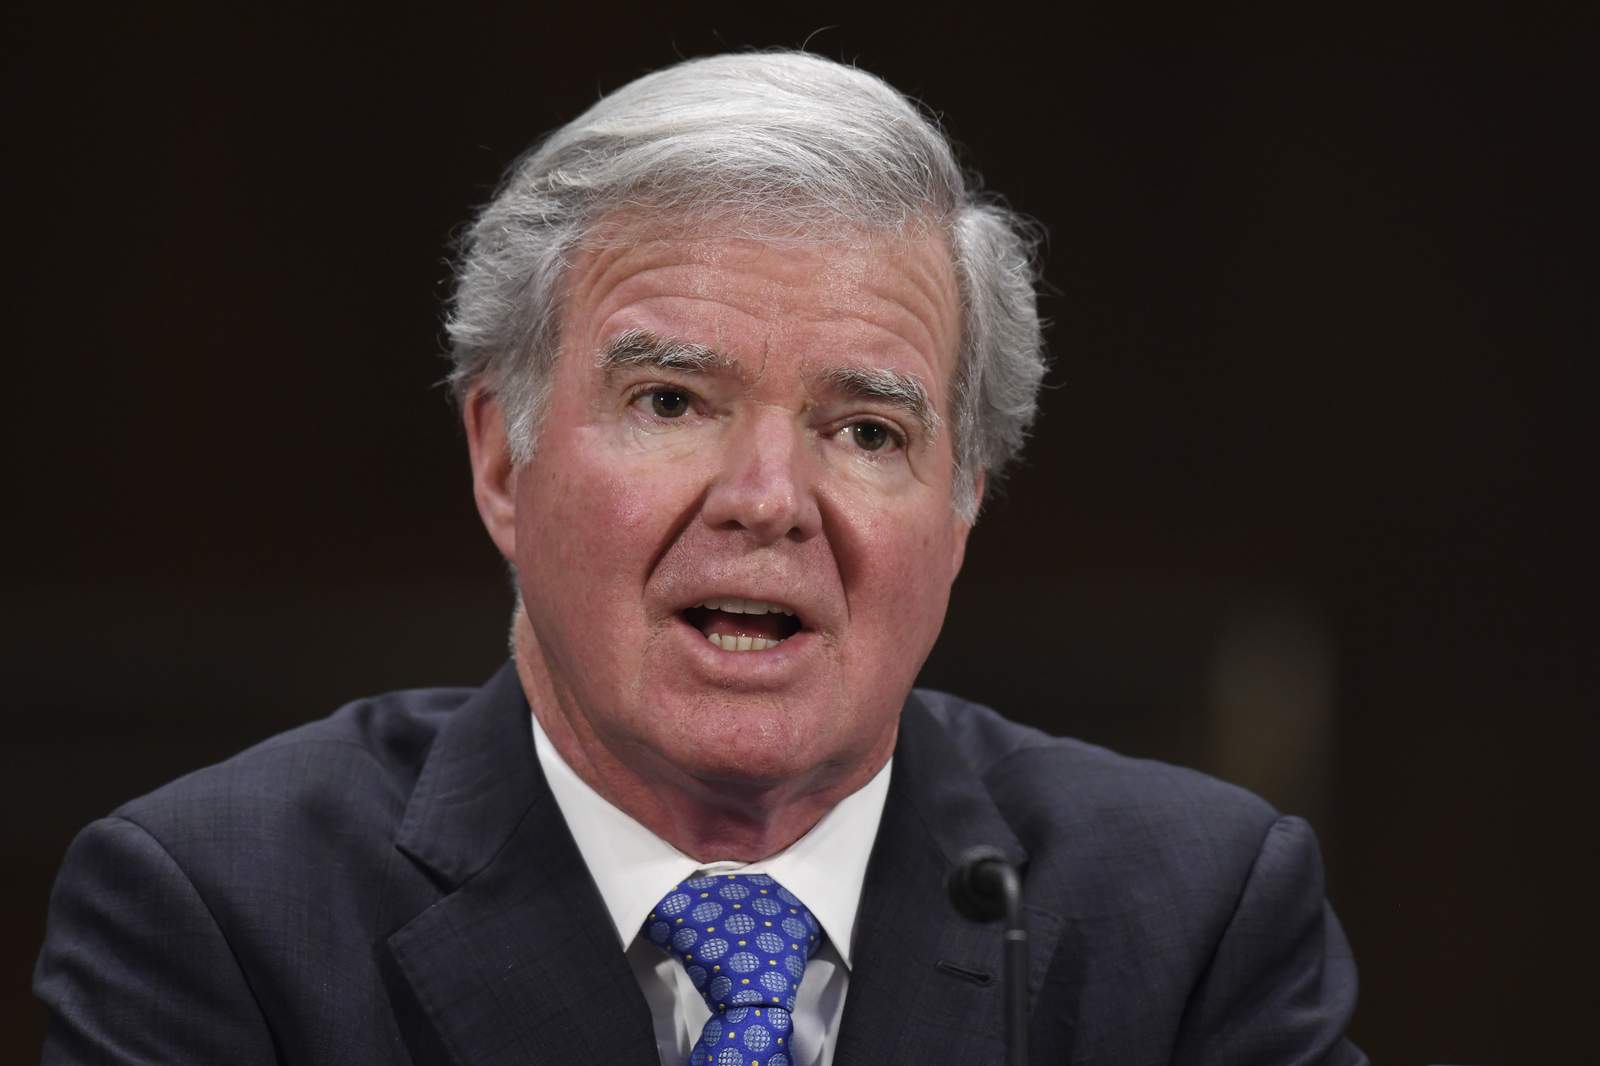 NCAA Board of Governors chair expresses confidence in Emmert